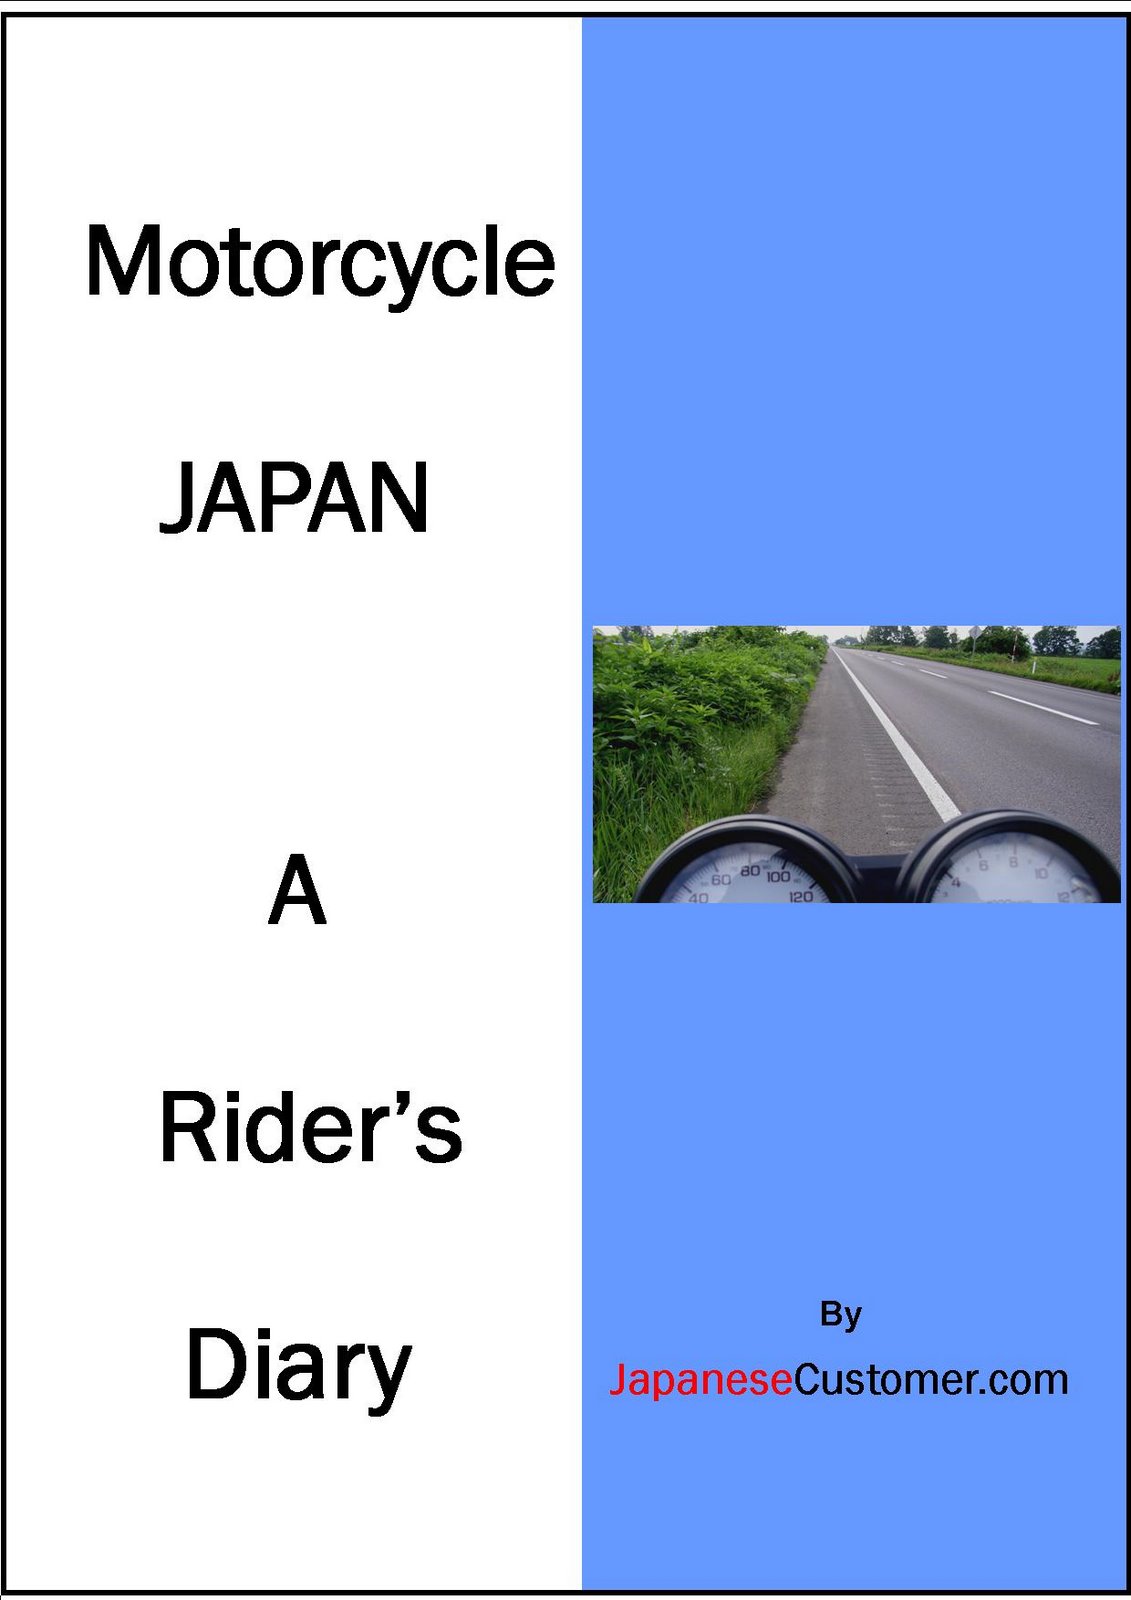 [final+cover+Motorcycle+Japan+A+rider's+diary.jpg]